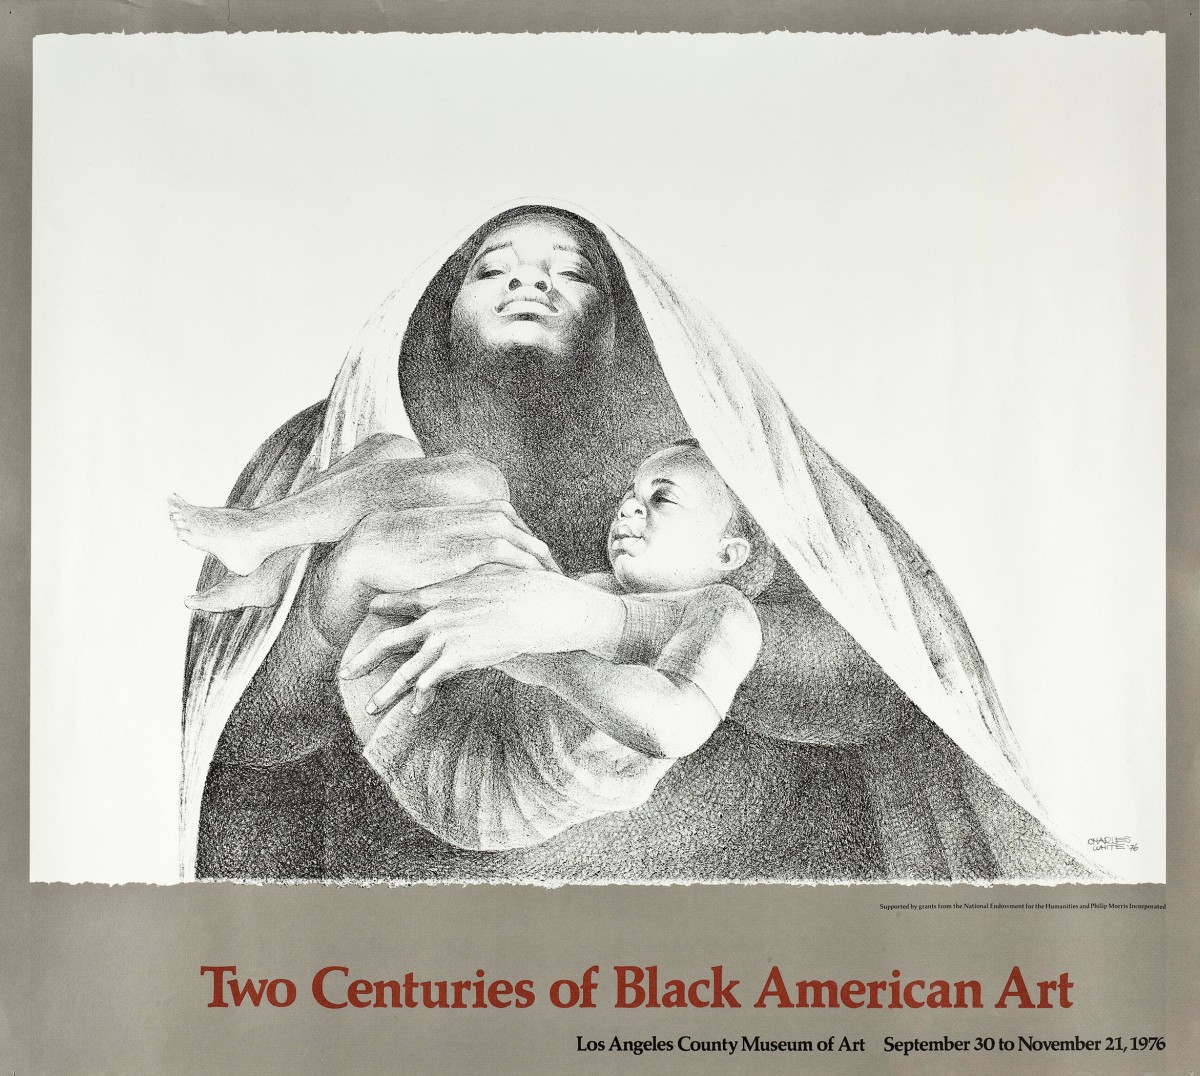 Exhibition Poster: Two Centuries of Black American Art